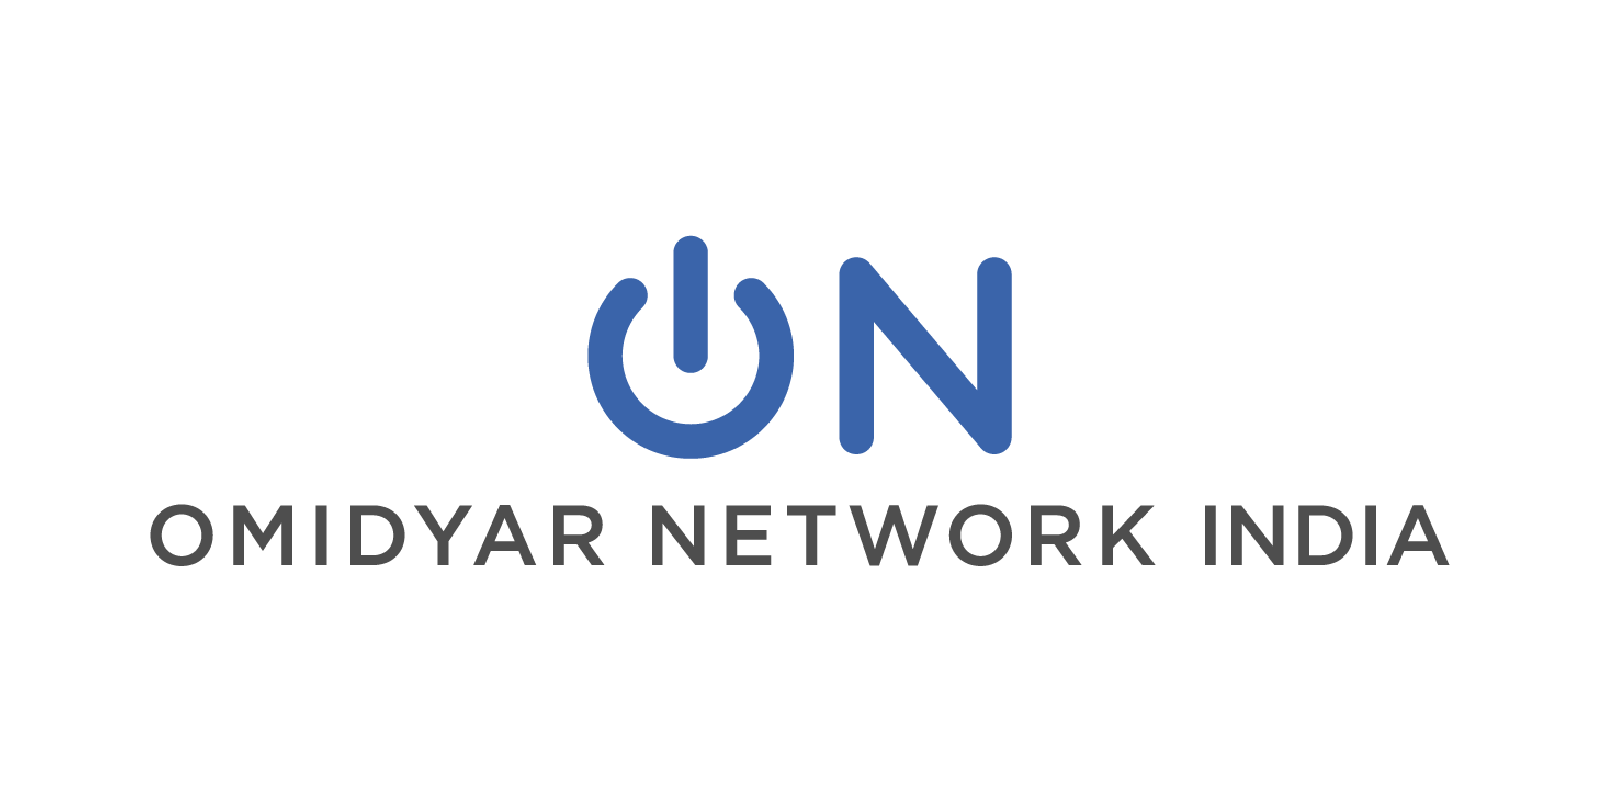 Exclusive: Omidyar Network India to shut operations